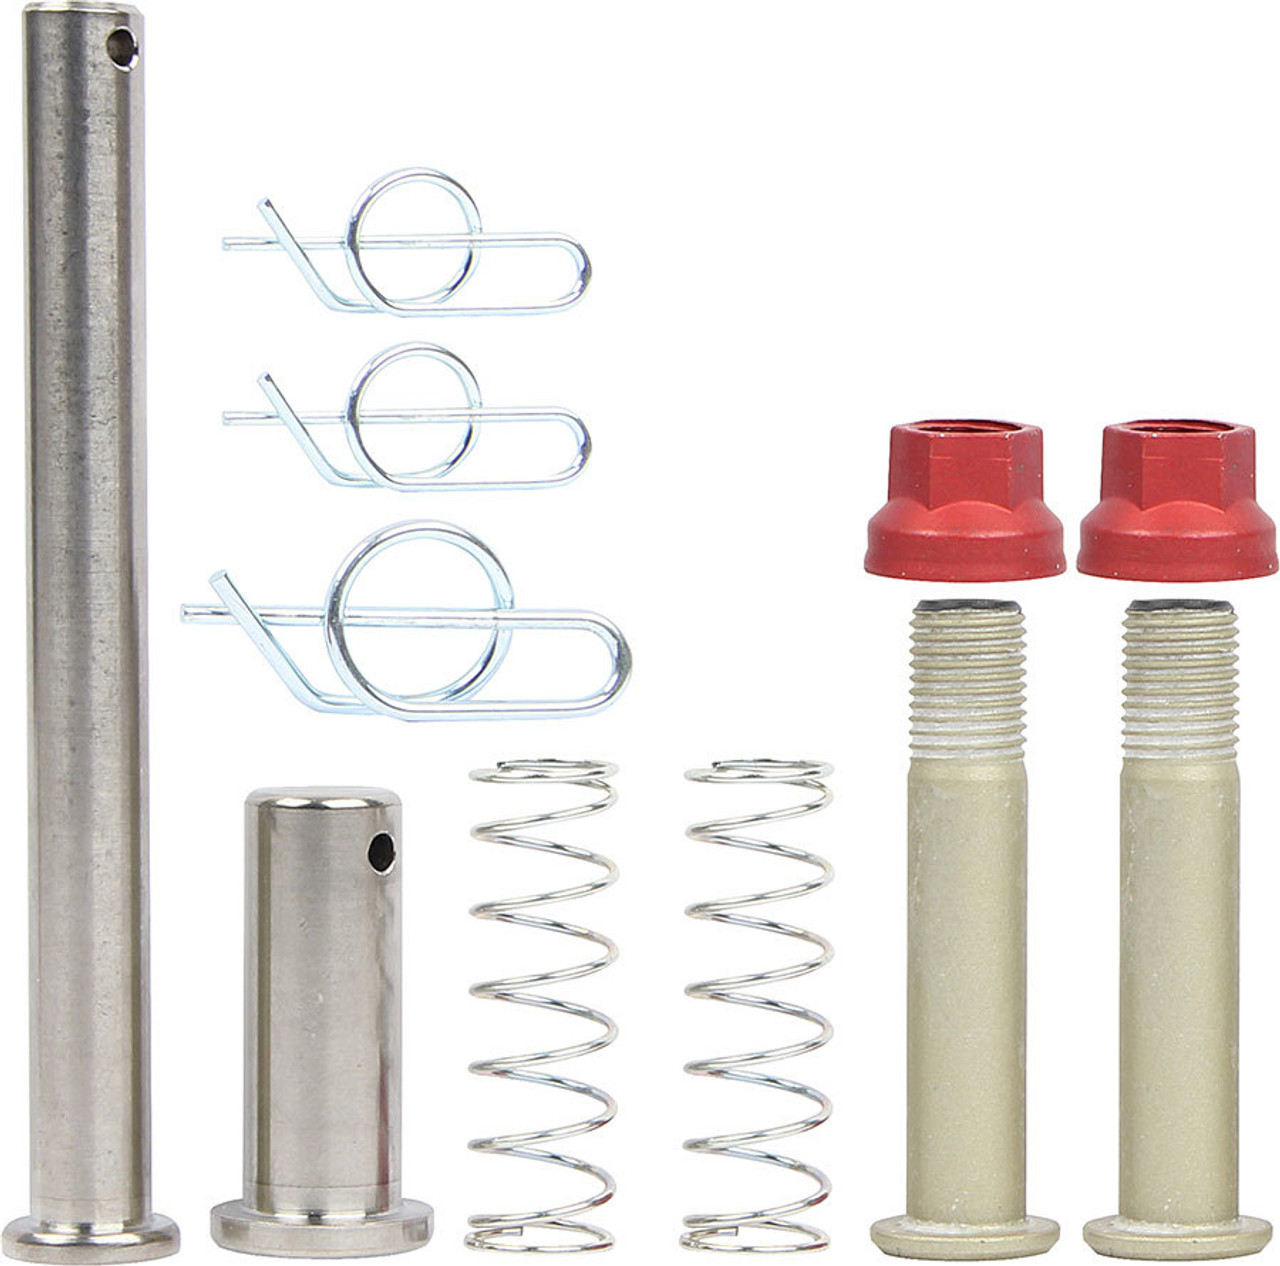 Includes: 2) 3-1/2 Grip Pins 2) Spring Spacers 2) Clips 1) 1/2 Birdcage Pin and Clip 2) 3/8-24 x 1-7/8 Flat Head Bolts 2) 3/8-24 Aluminum Nuts